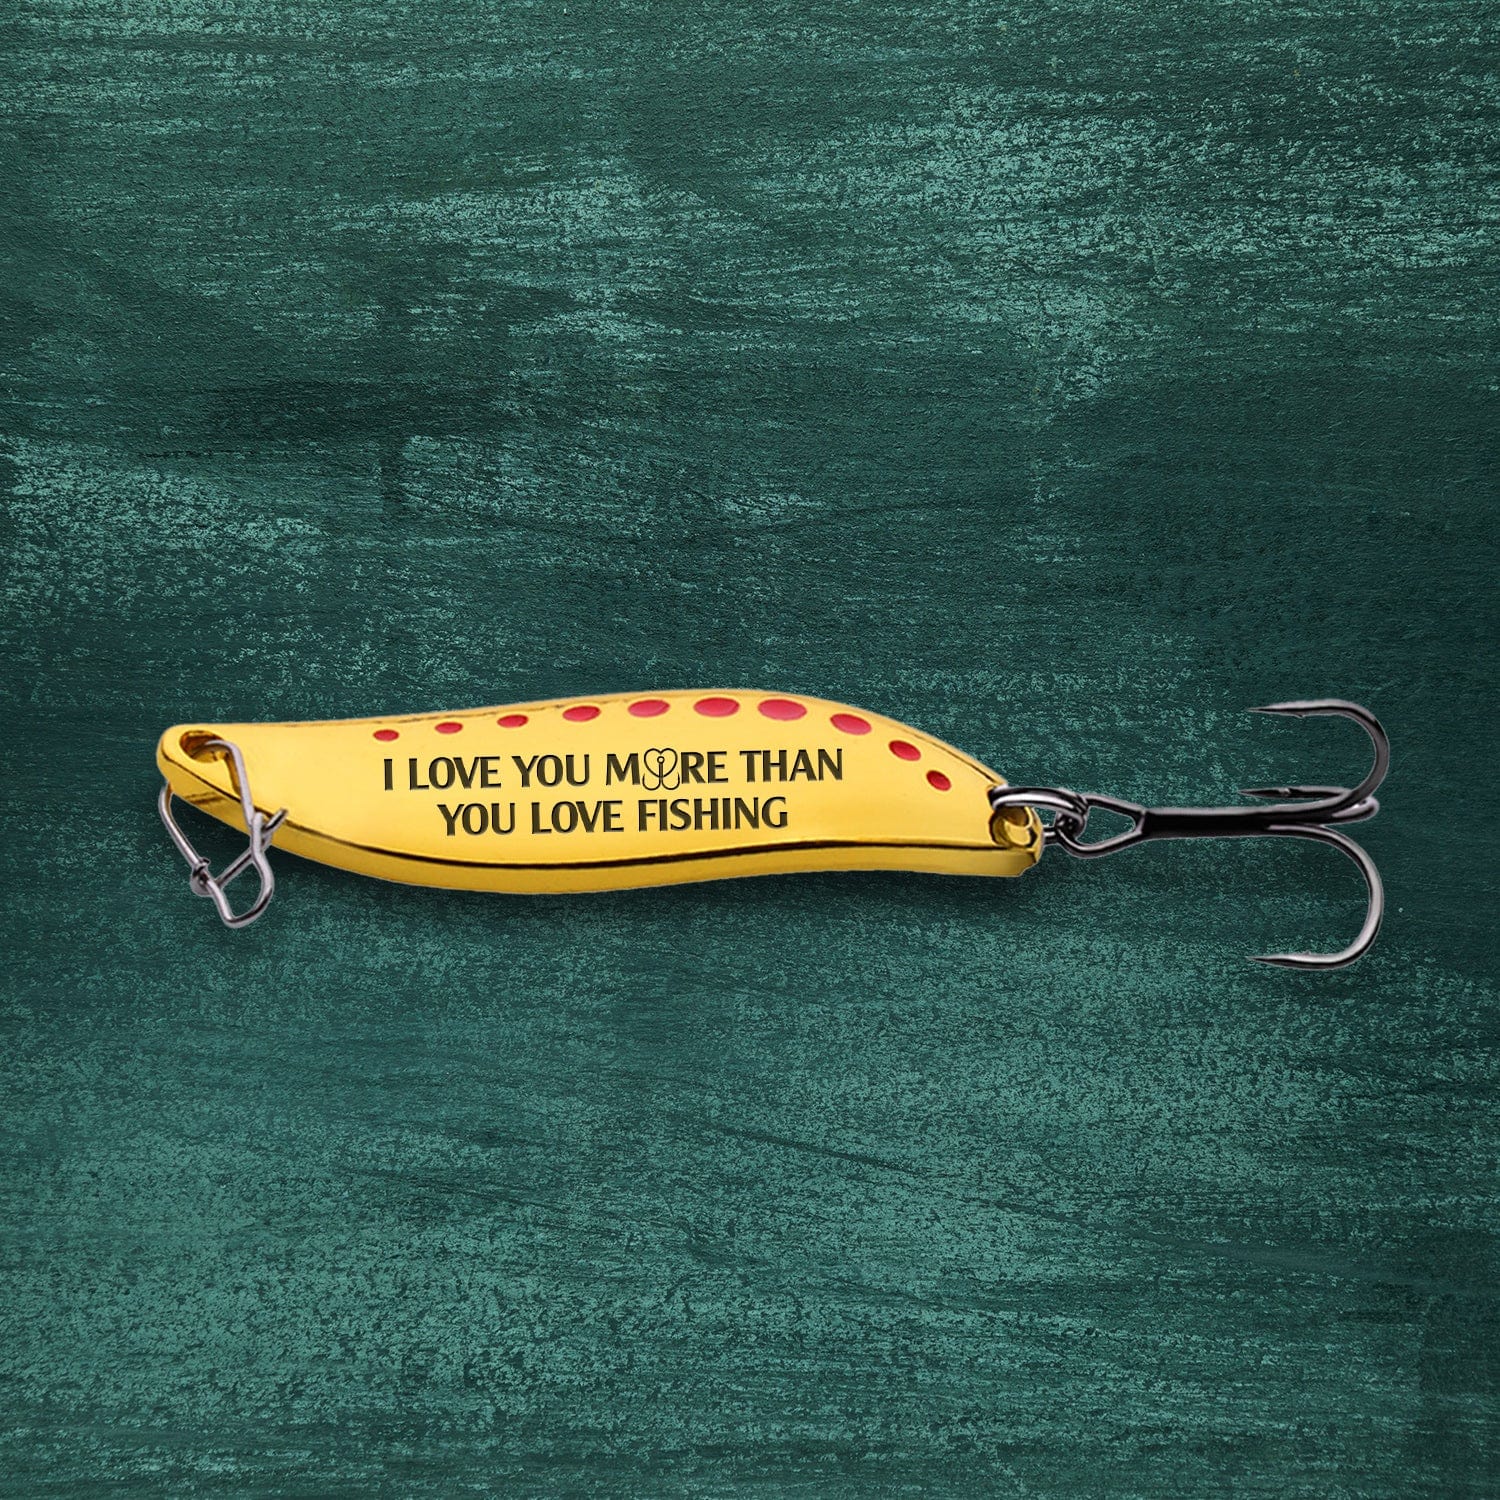 Fishing Lures - Fishing - To My Boyfriend - You Are My Best Friend, My  Soulmate My Everything - Gfaa12004